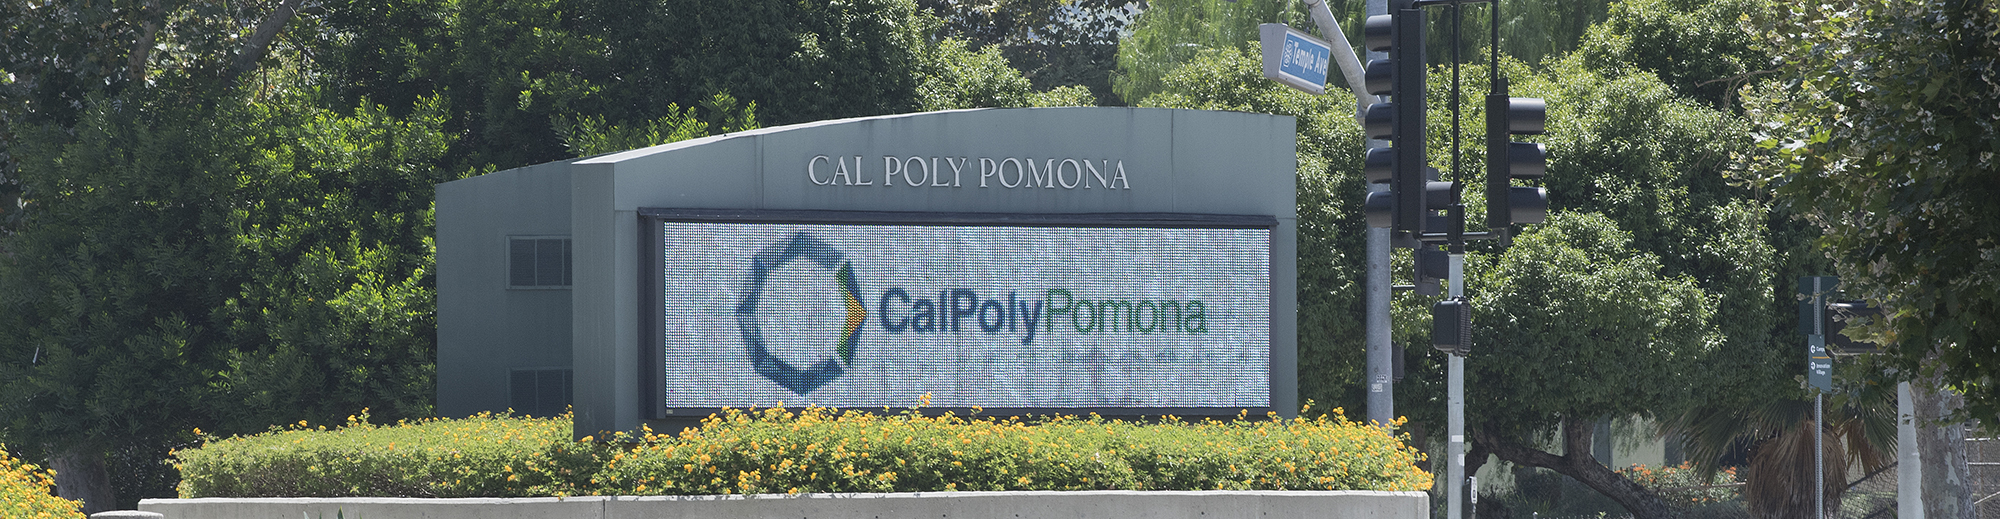 Marquee for Cal Poly Pomona